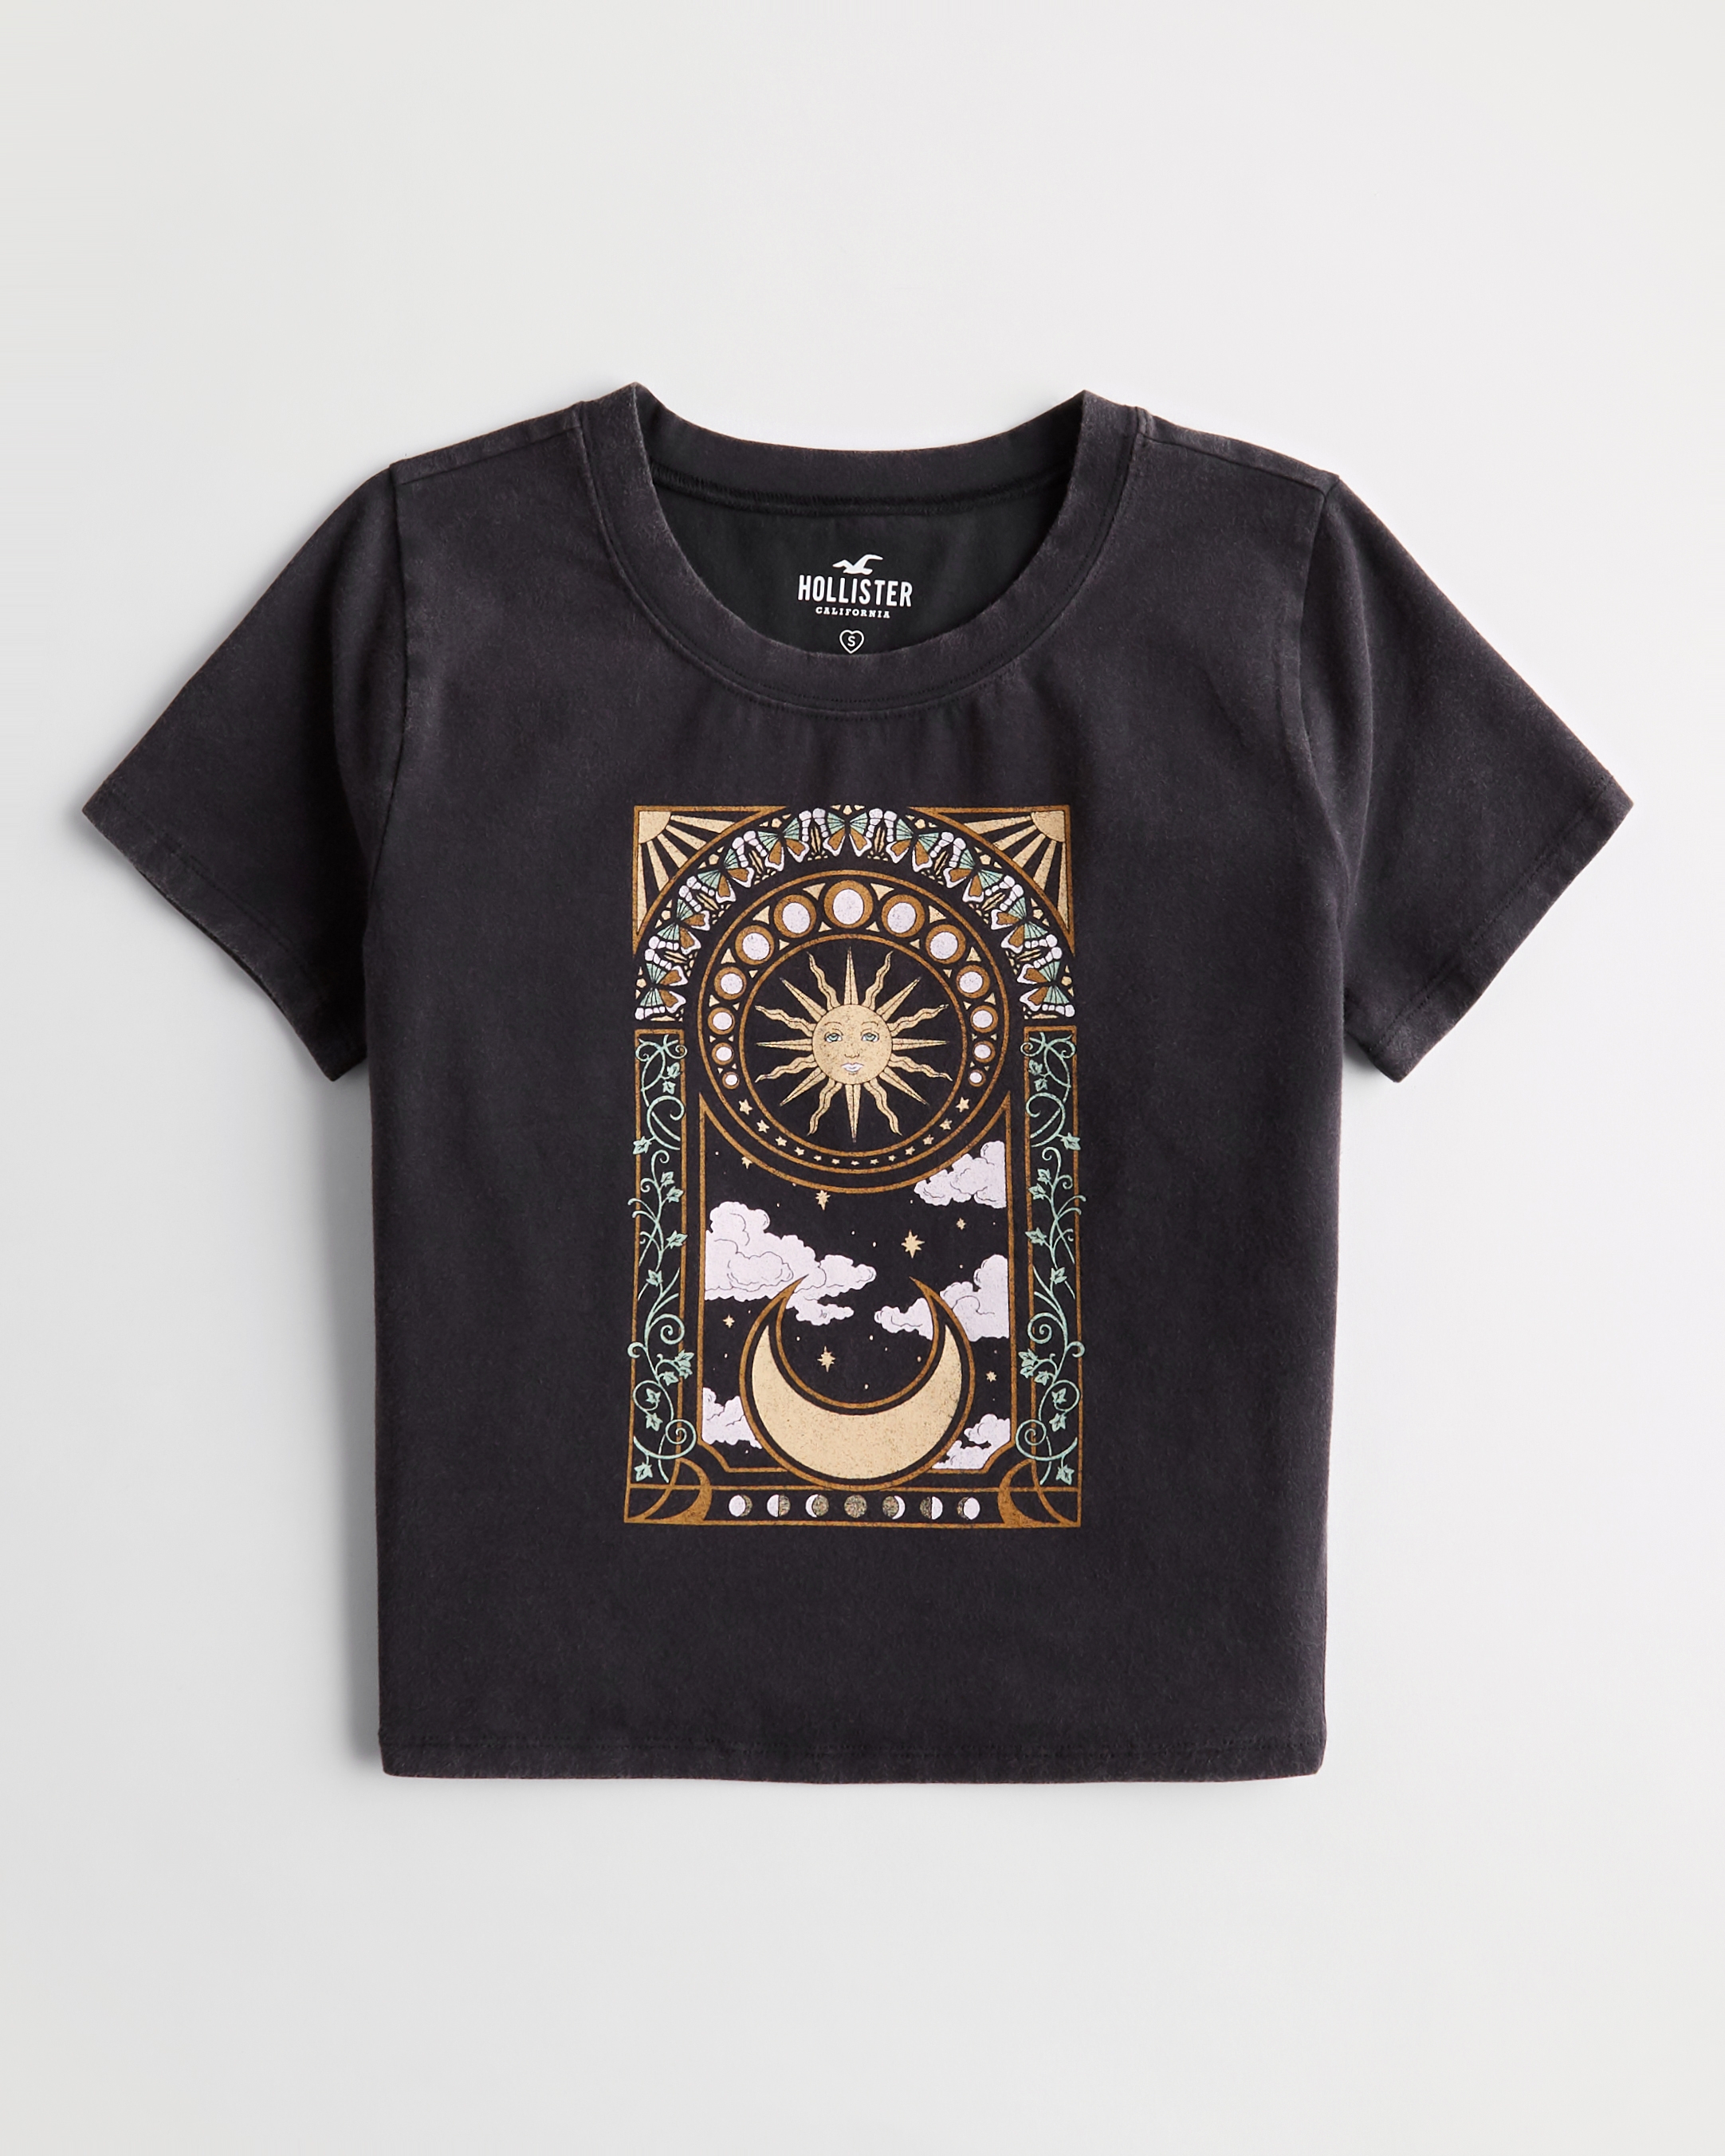 Hollister Lace Trim V-Neck Baby Tee